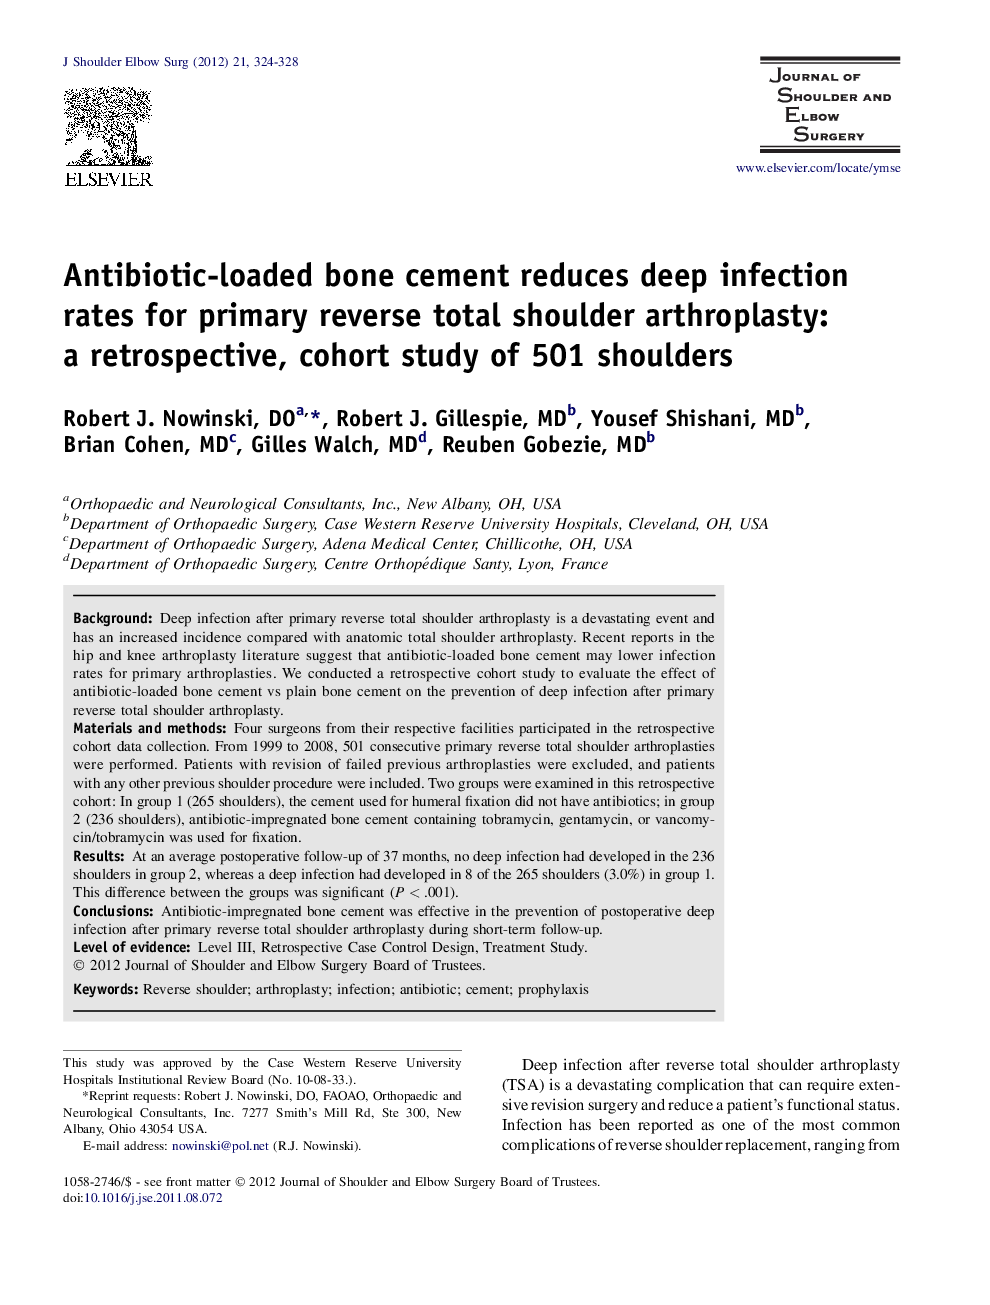 Antibiotic-loaded bone cement reduces deep infection rates for primary reverse total shoulder arthroplasty: a retrospective, cohort study of 501 shoulders 